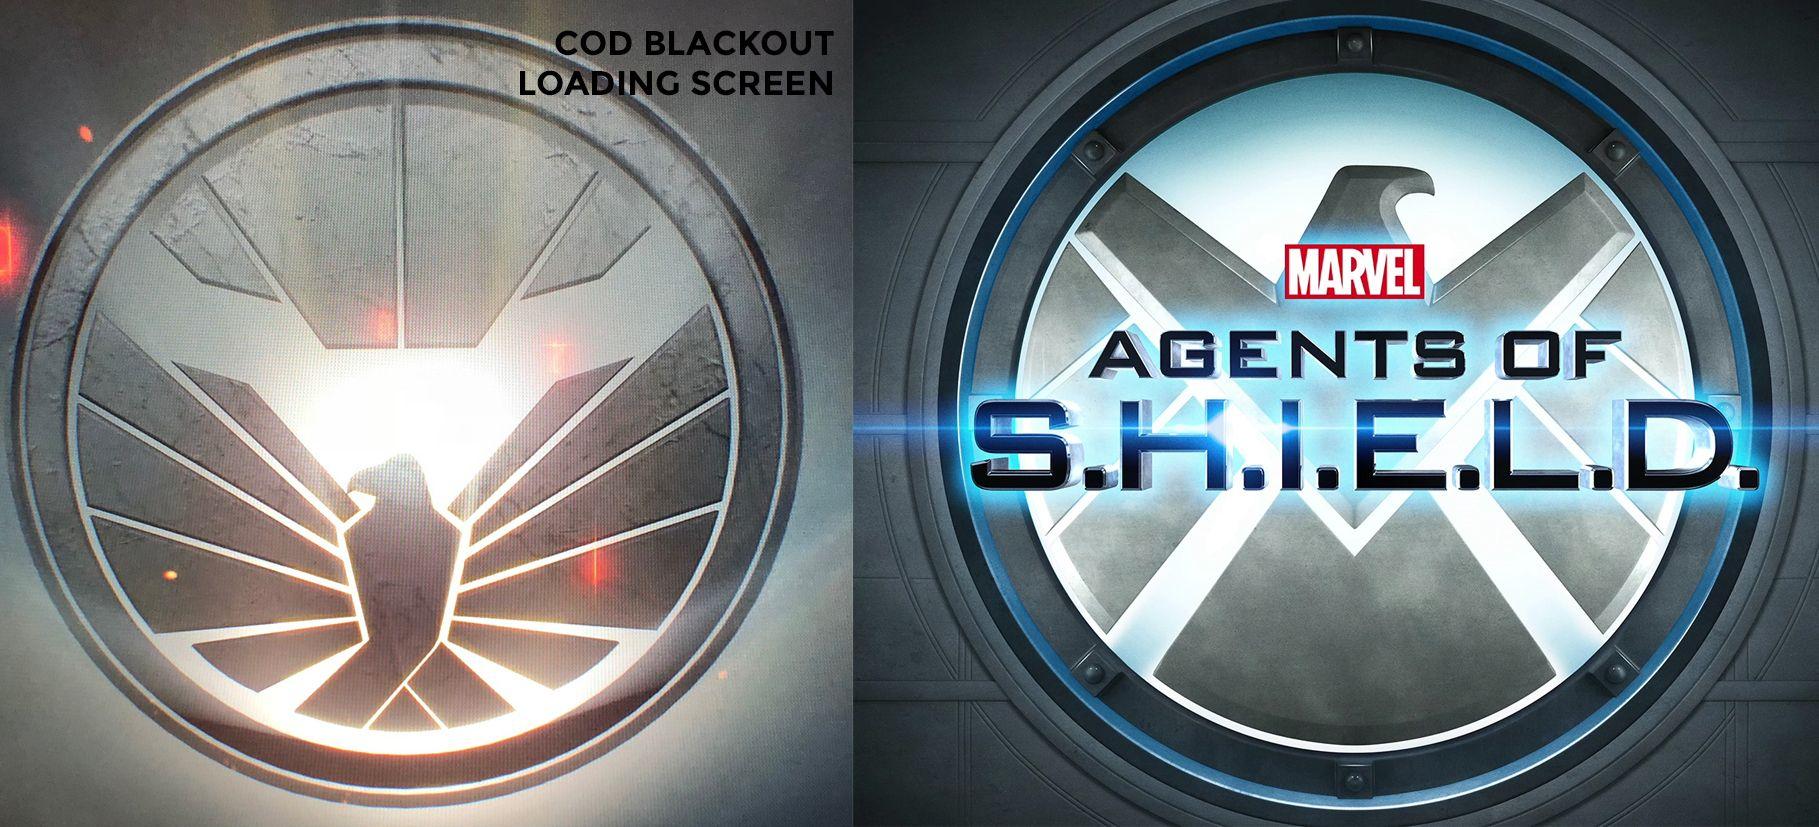 Blackout Bo4 Logo - Blackout's loading screen is awfully similar to Agents of Shield ...